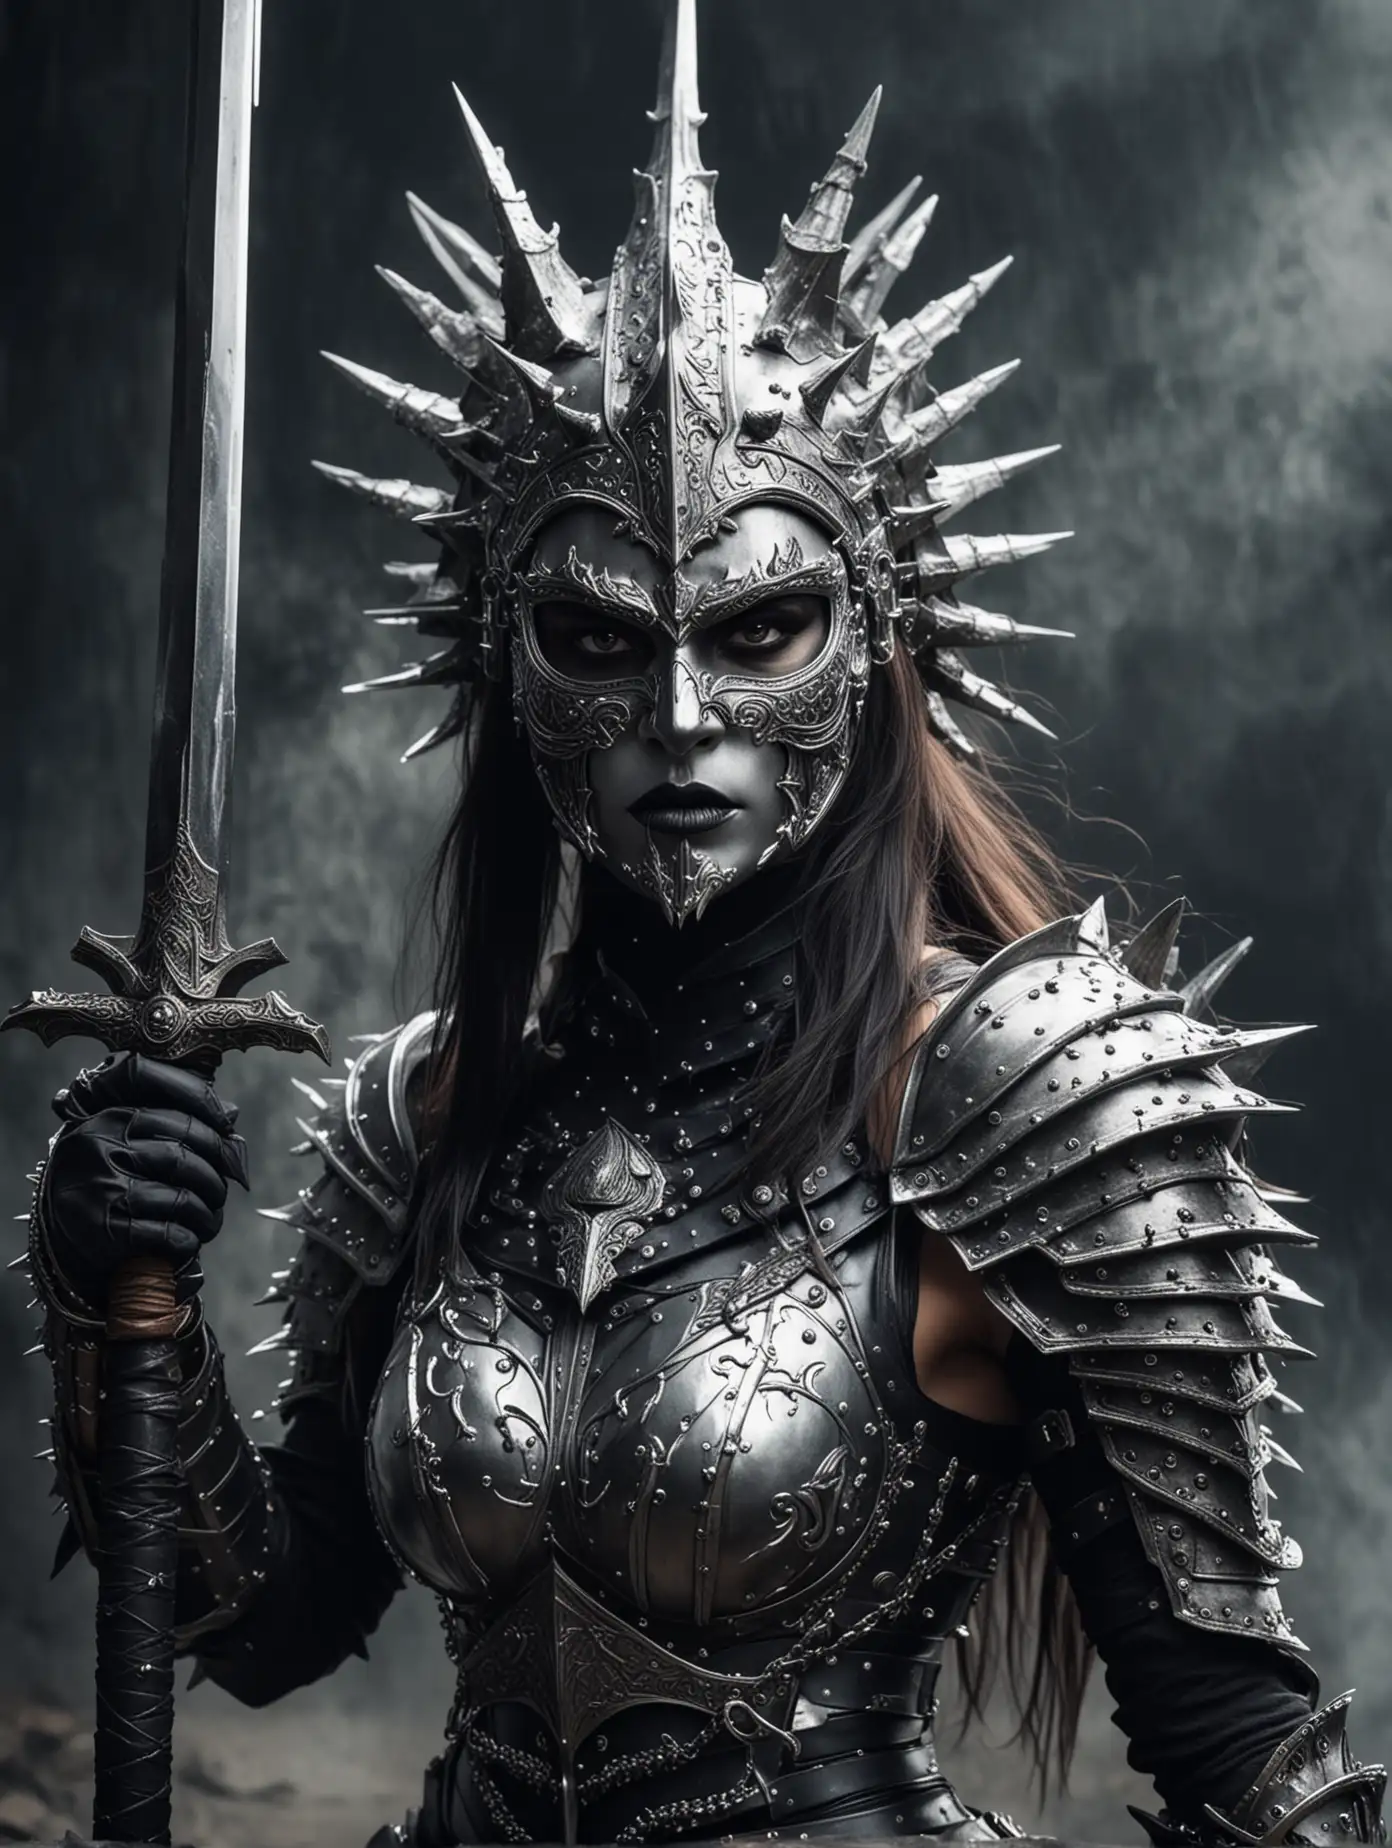 Intimidating-Female-Warrior-in-Spiked-Silver-Armor-Brandishing-a-Sword